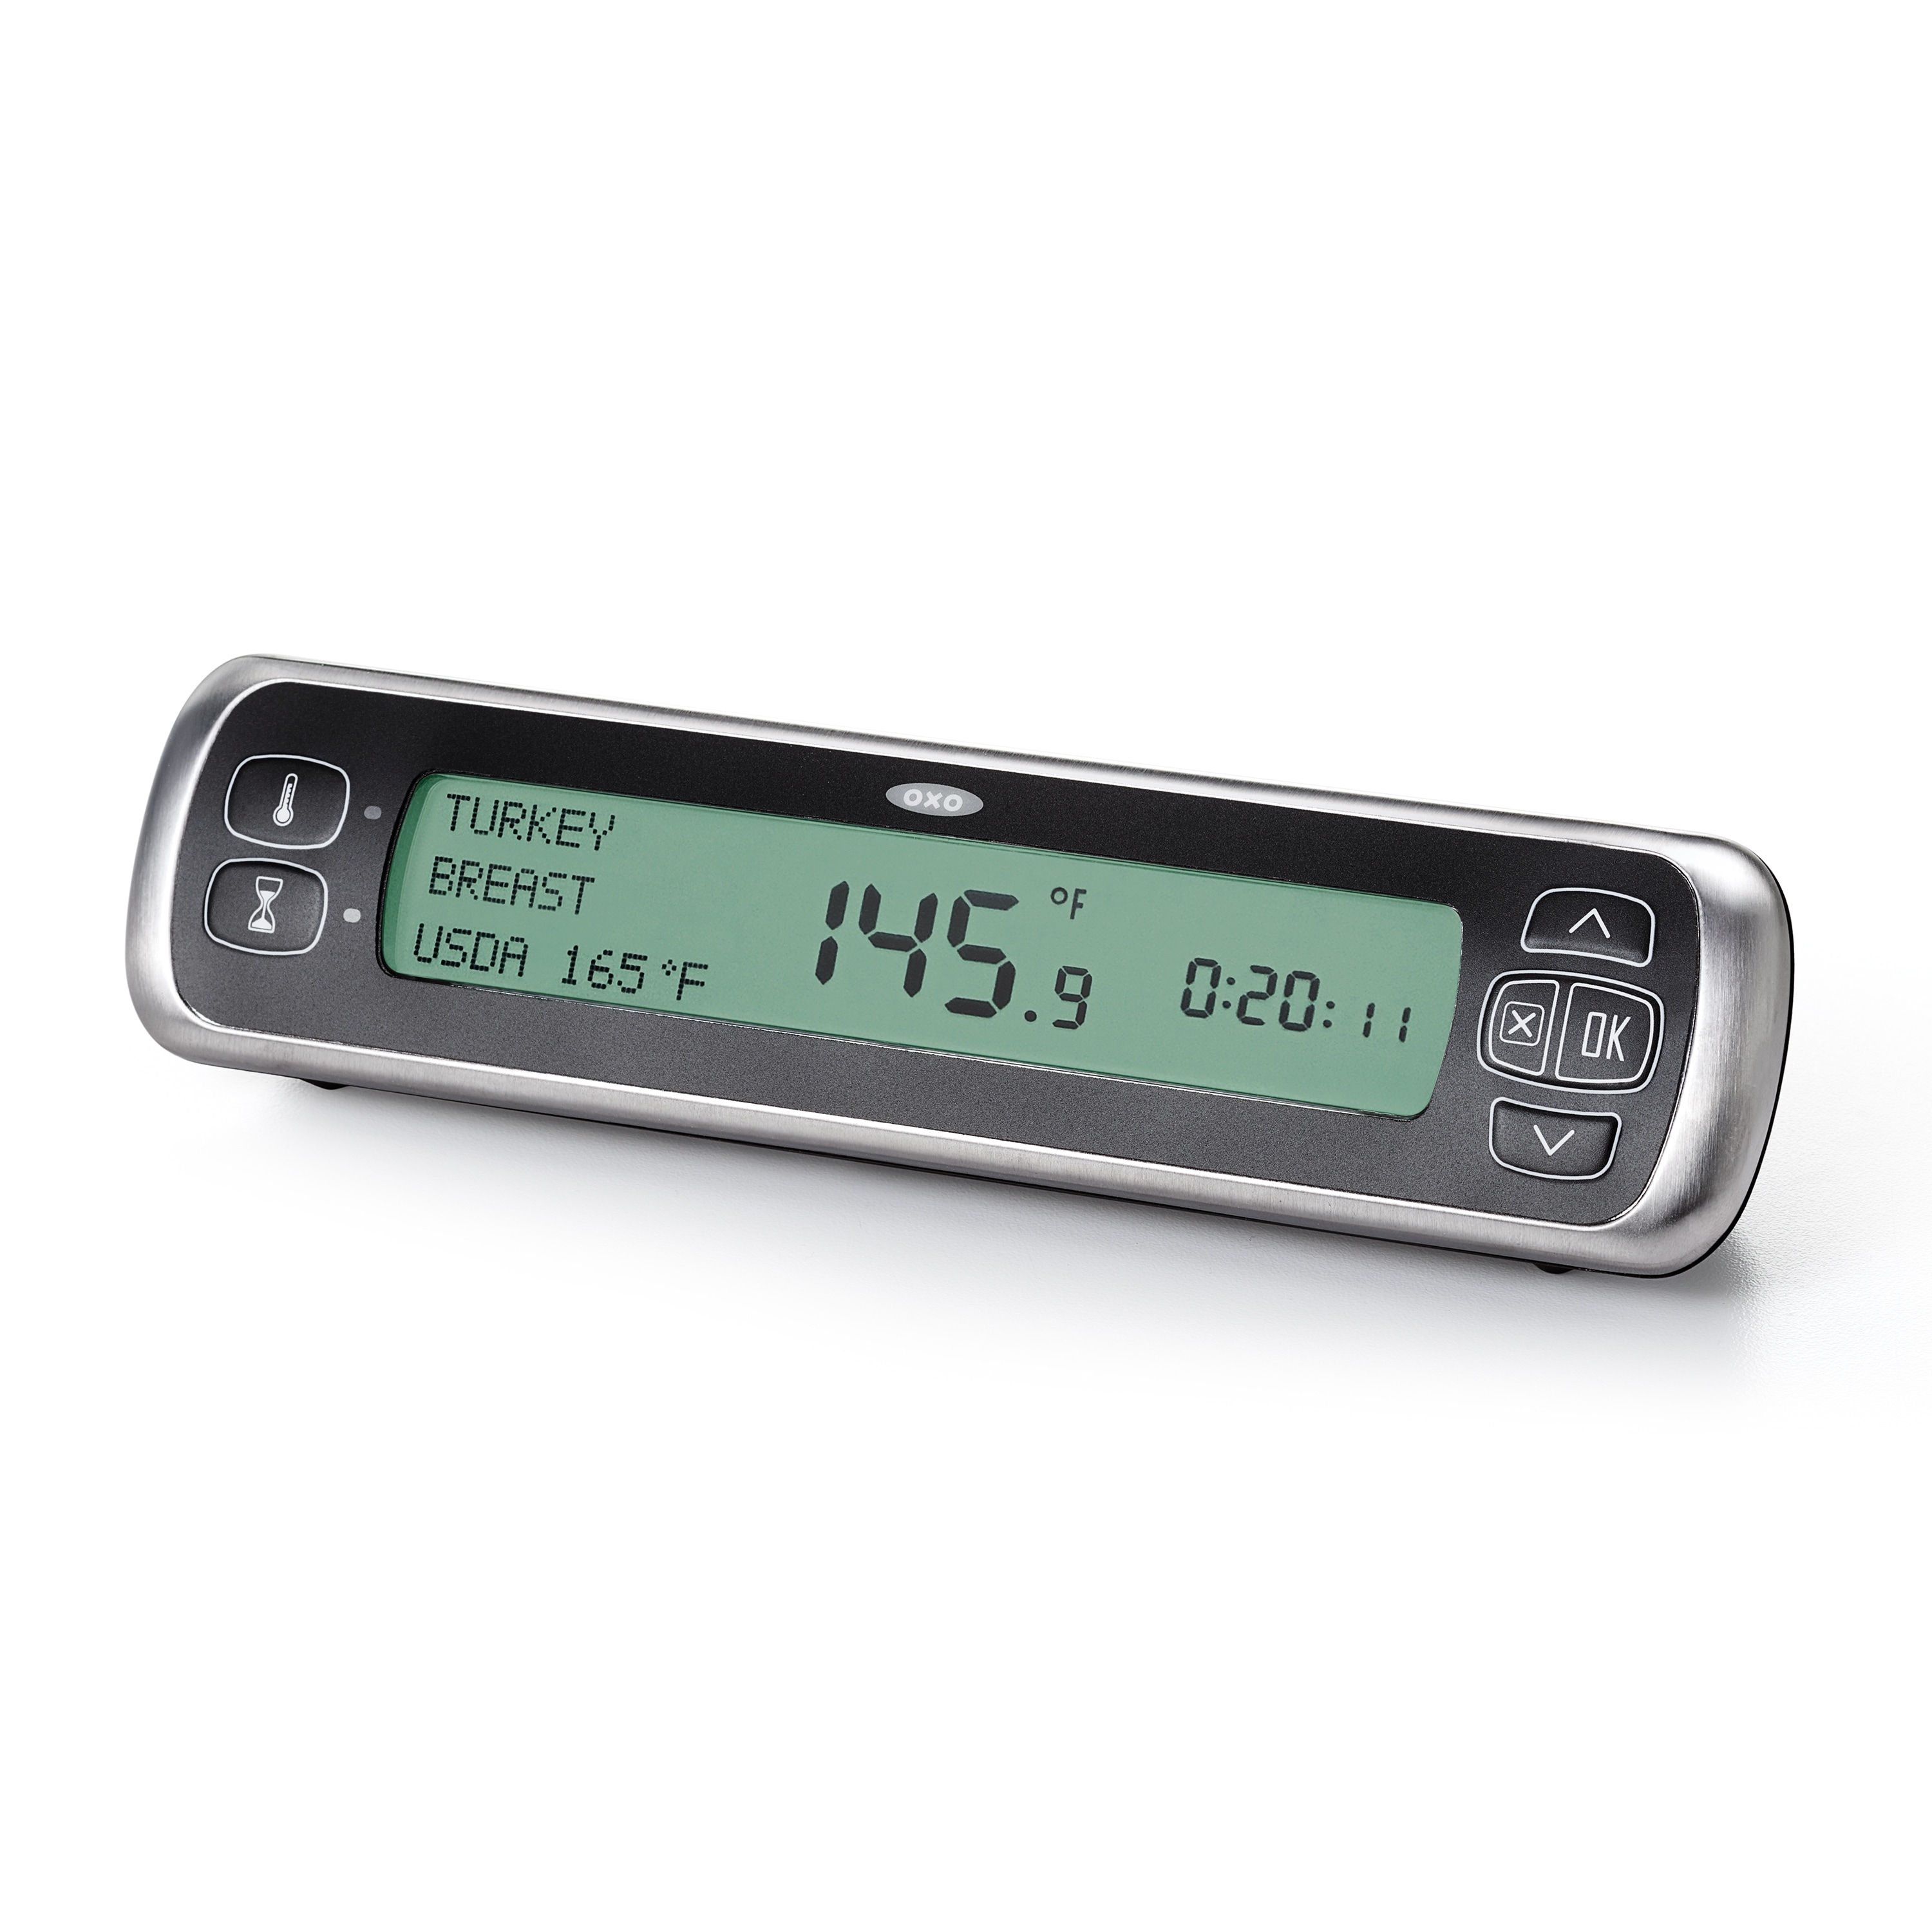 Cheer Collection Wireless Digital Food Thermometer - Cheer Collection